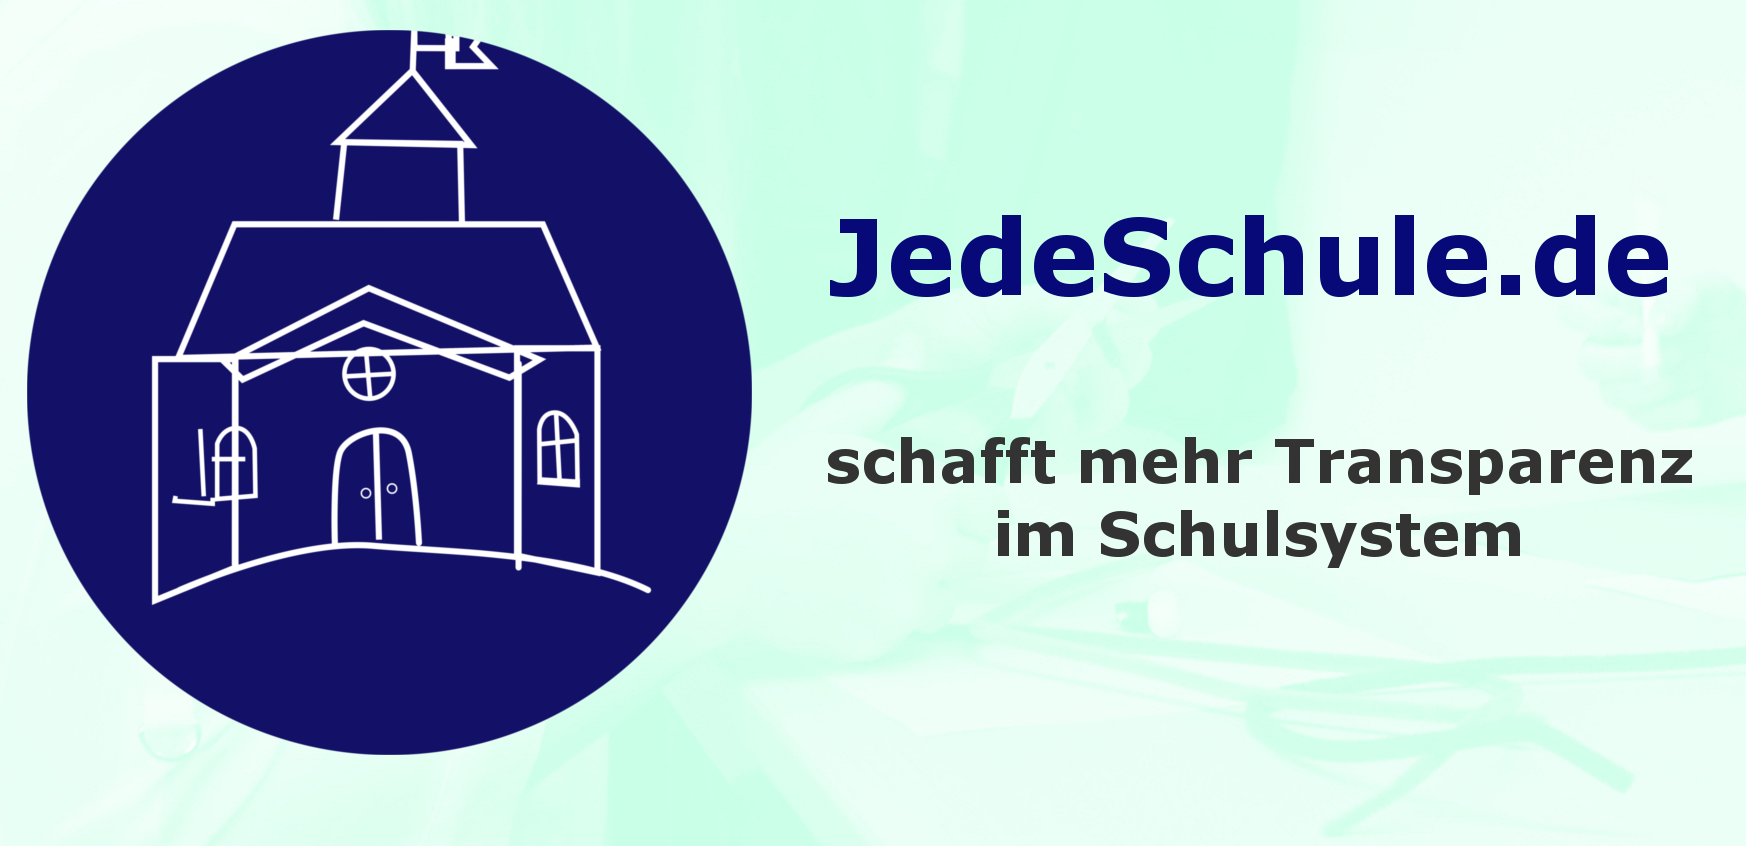 Launch: Jedeschule.de promotes transparency within the educational system in Germany